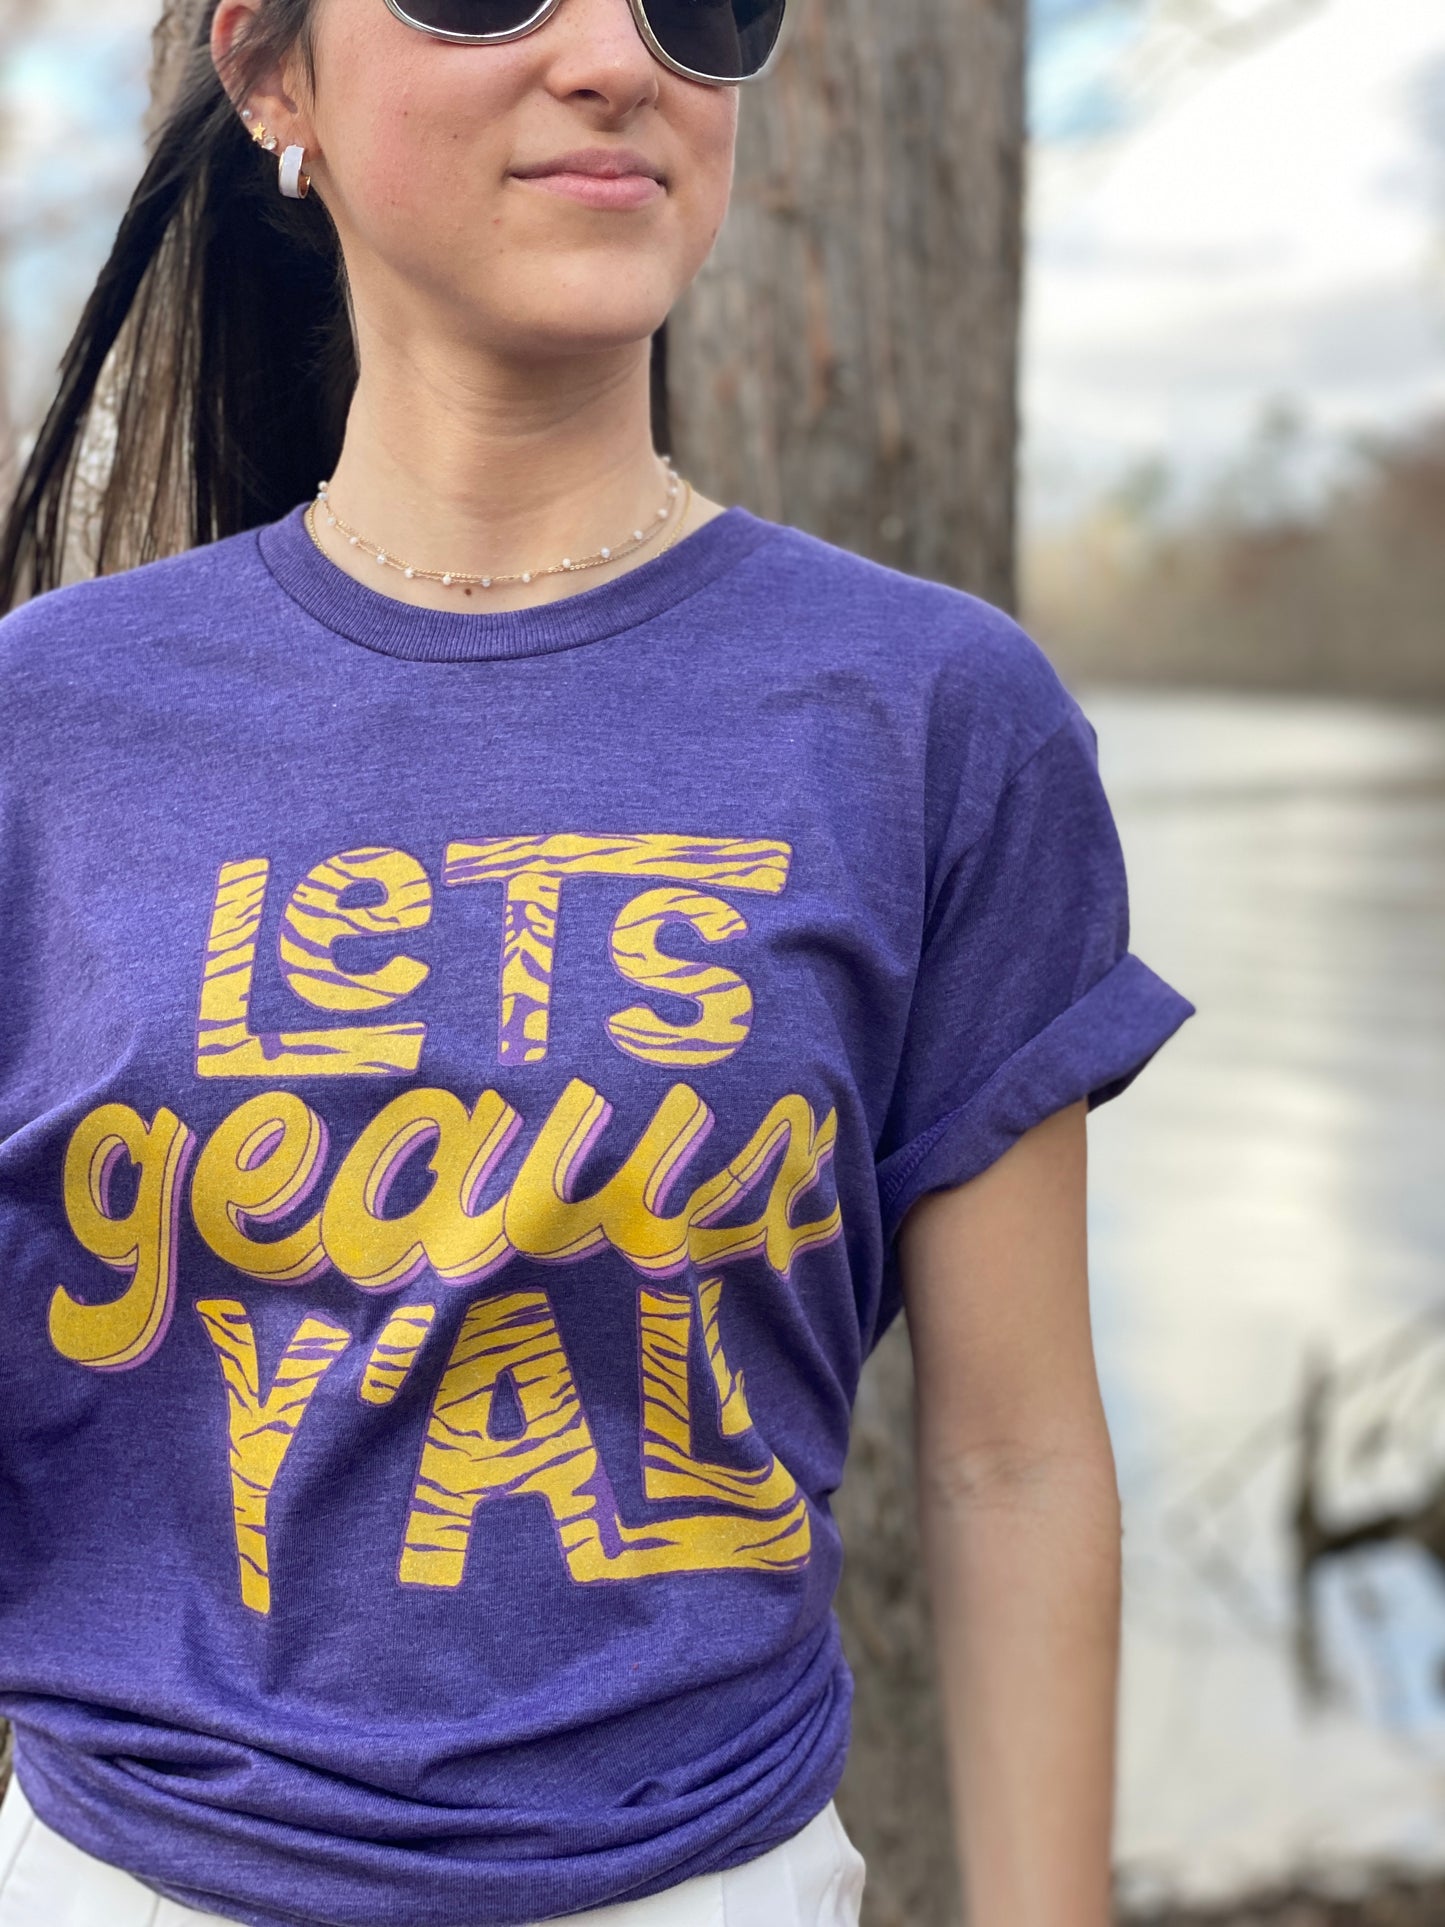 Let's Geaux Y'all Tee